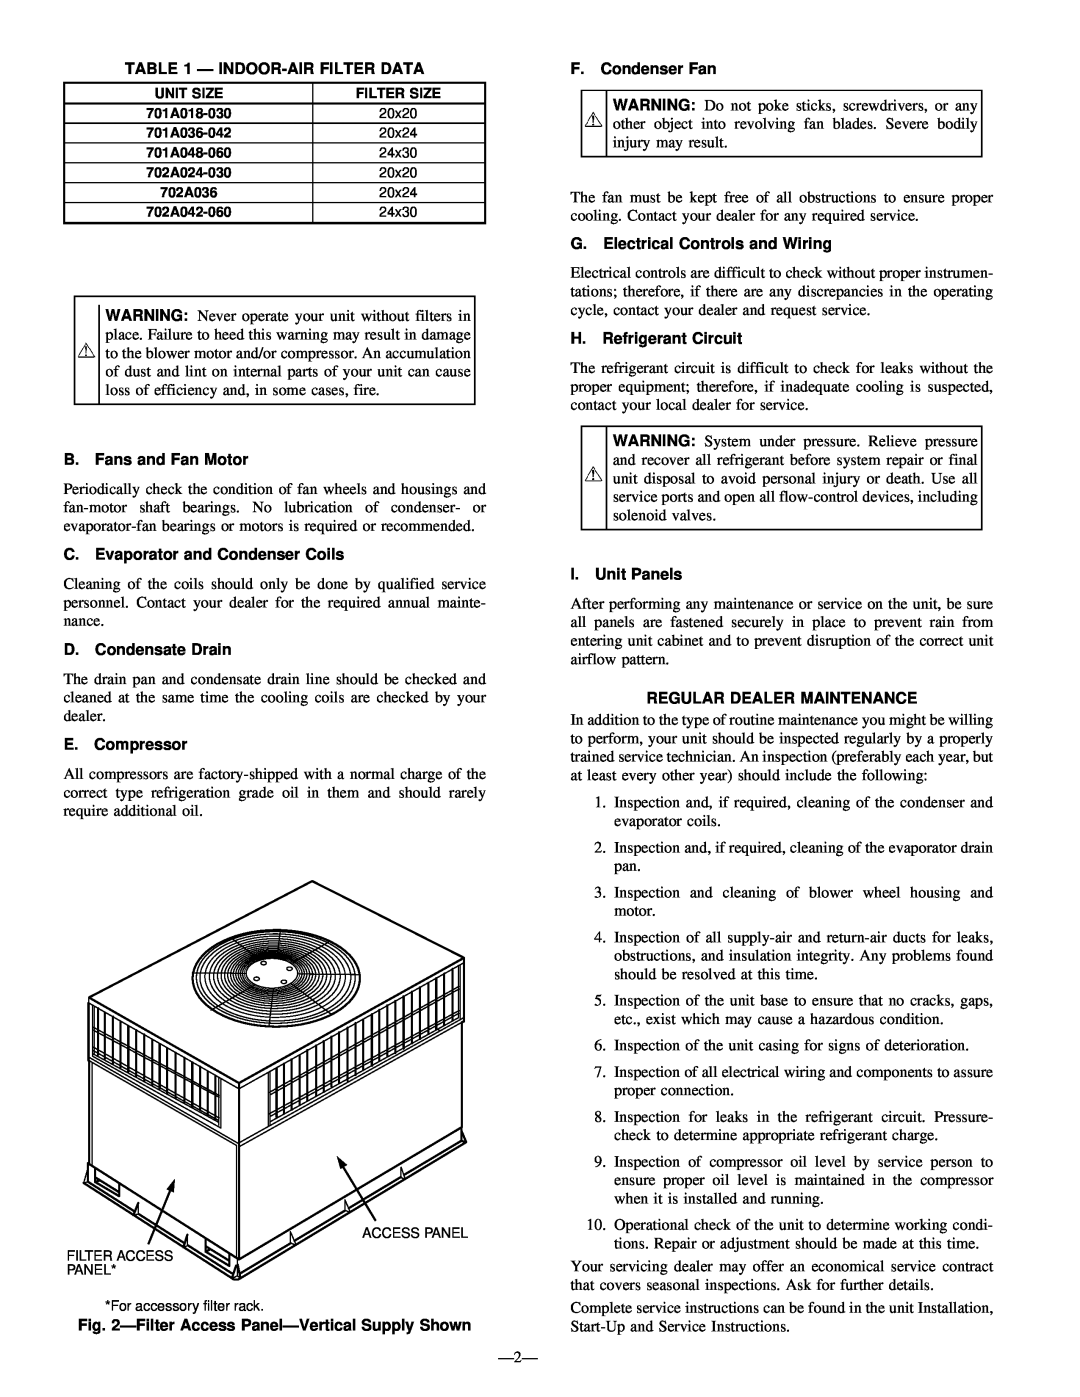 Bryant 702A, 701A manual Ð Indoor-Airfilter Data, B.Fans and Fan Motor, C.Evaporator and Condenser Coils, D.Condensate Drain 